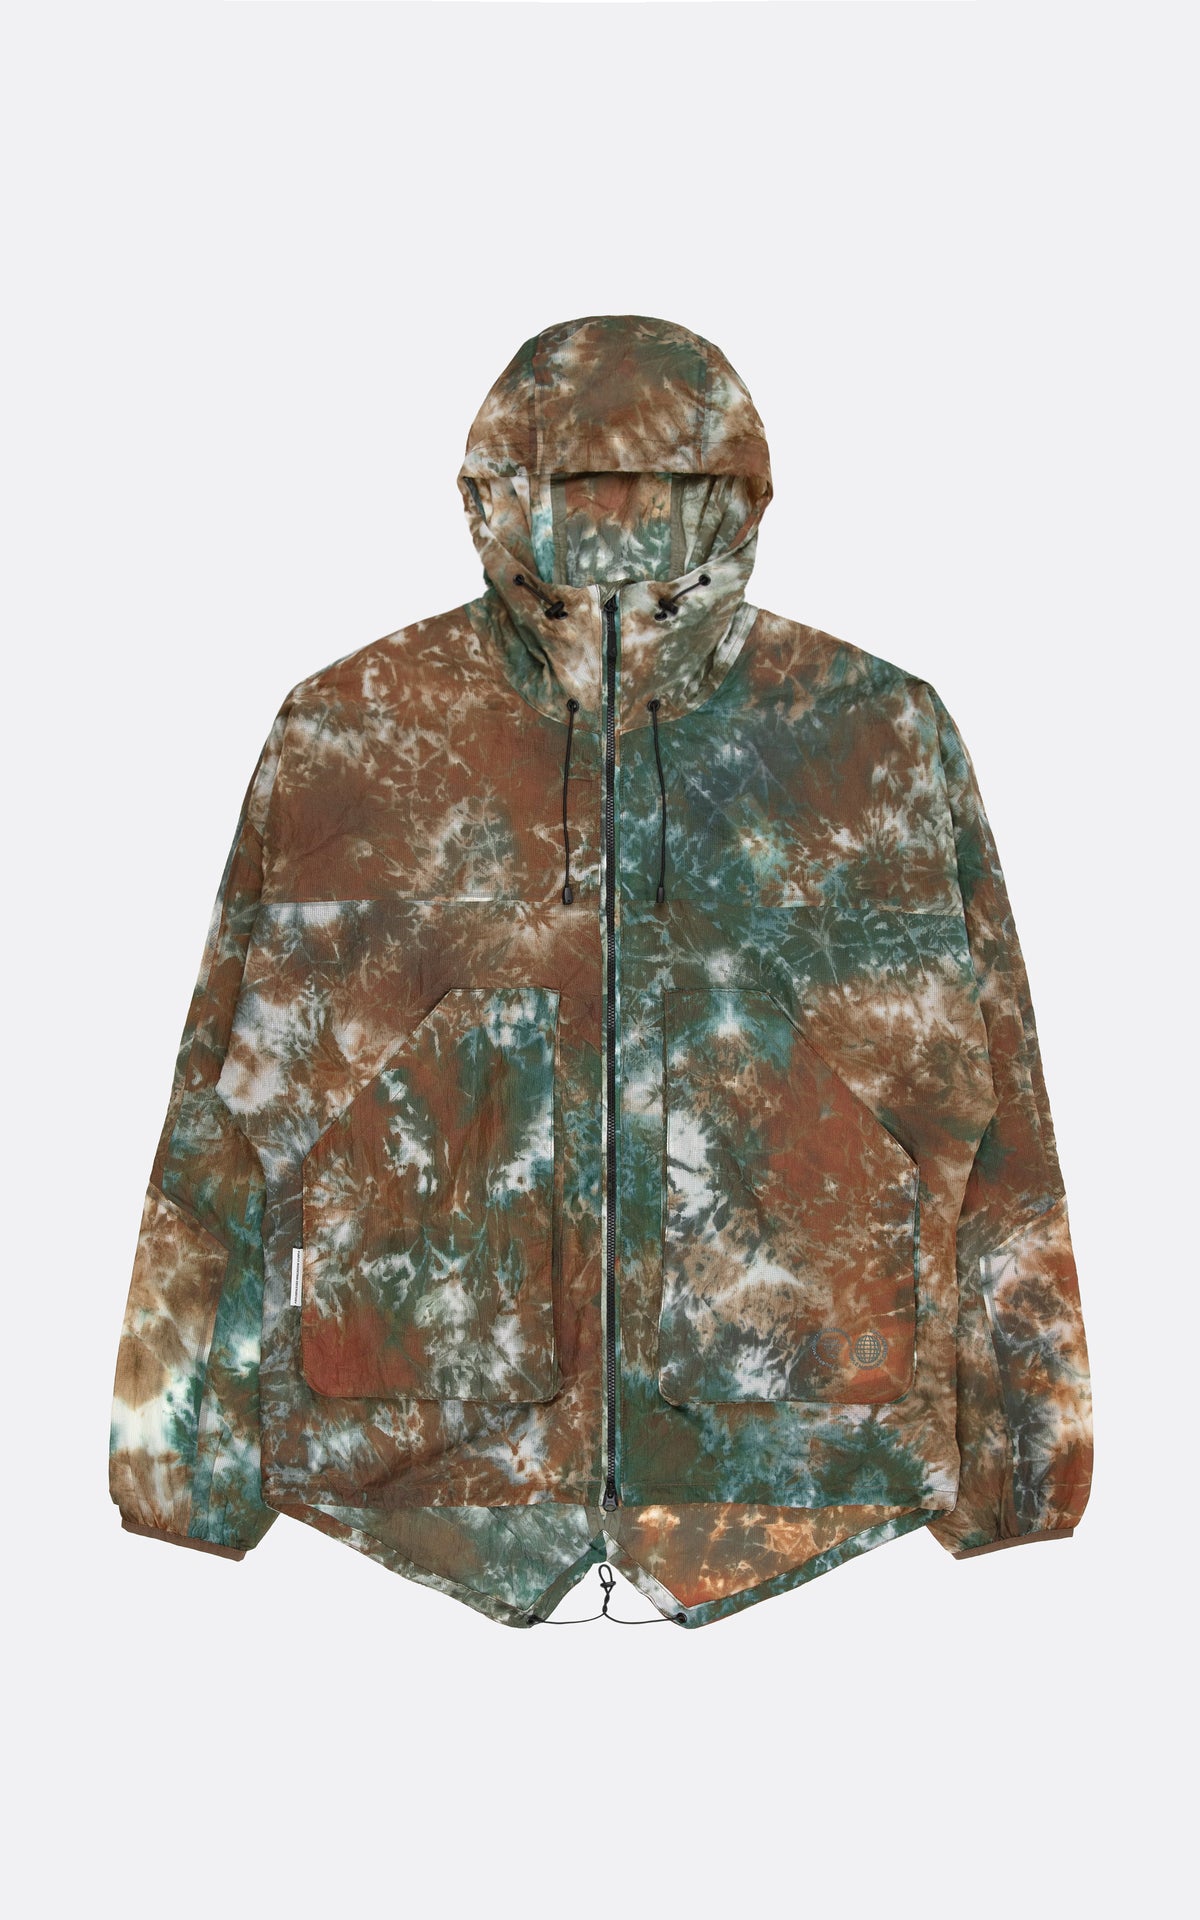 FISHTAIL RIPSTOP HOODED JACKET PEACH / TEAL ICE DYE